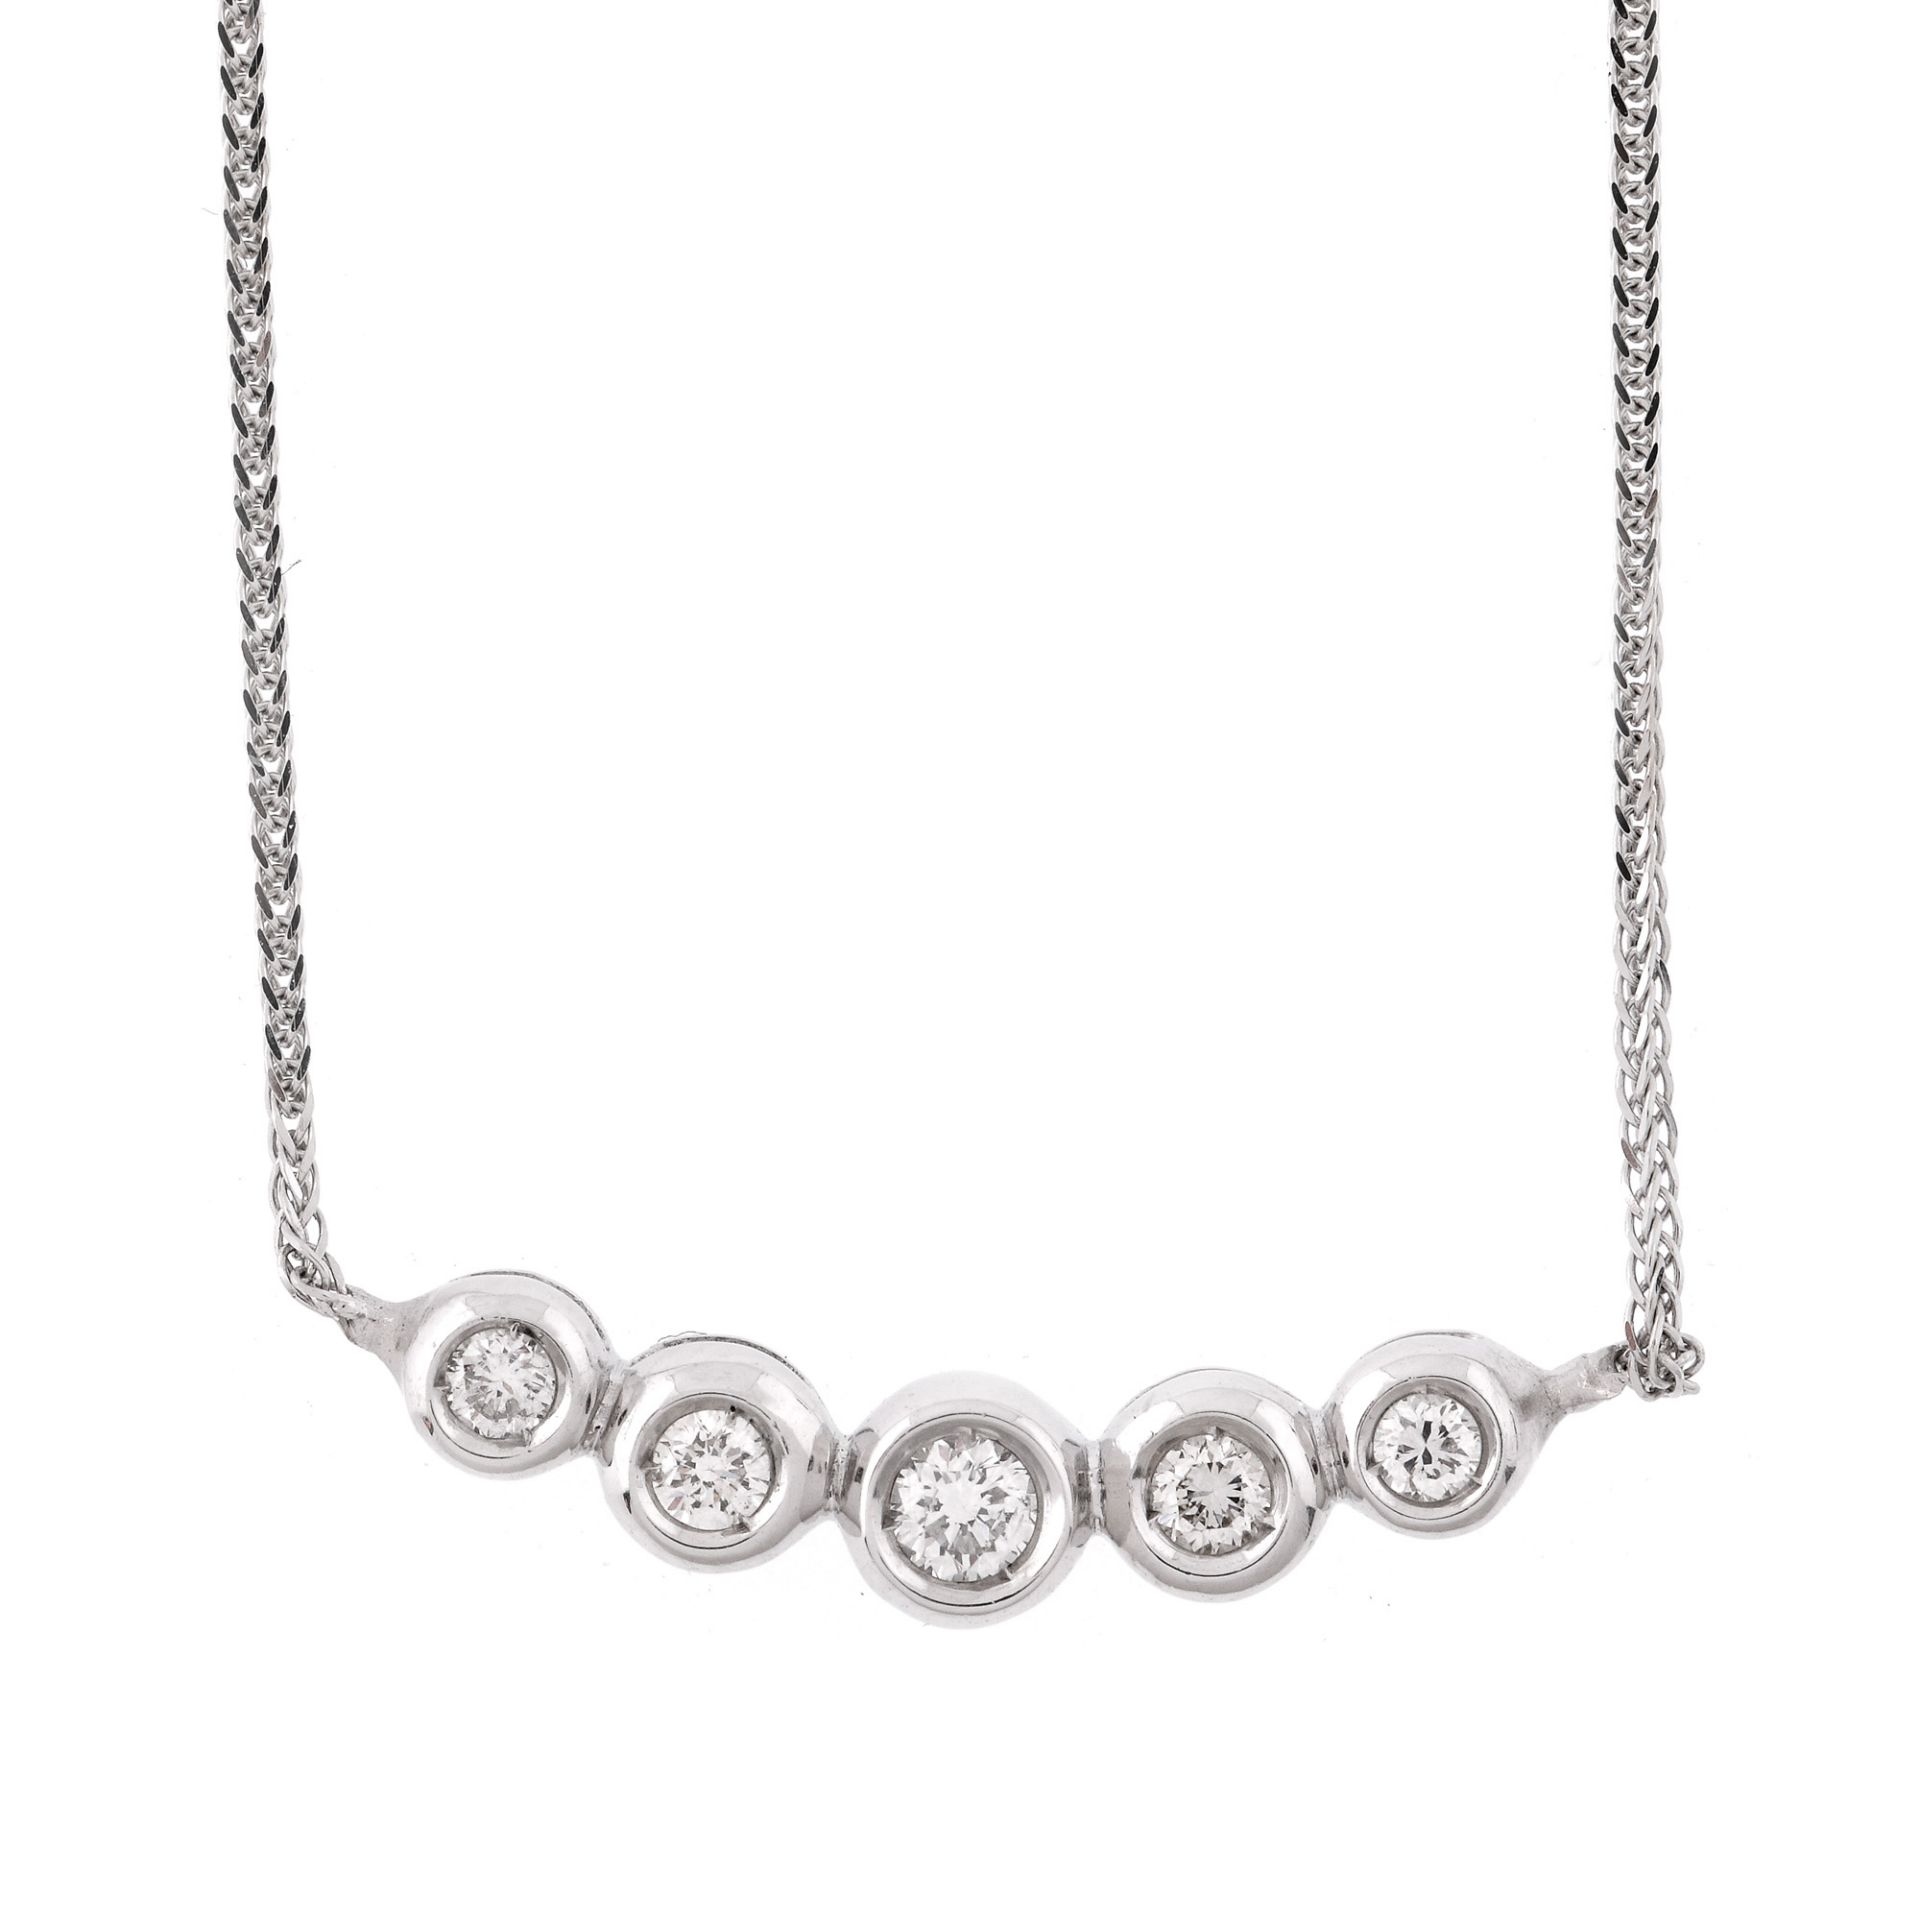 Convertible white gold pendant necklace, five ways to wear, decorated with diamonds and pink tourmal - Image 4 of 4